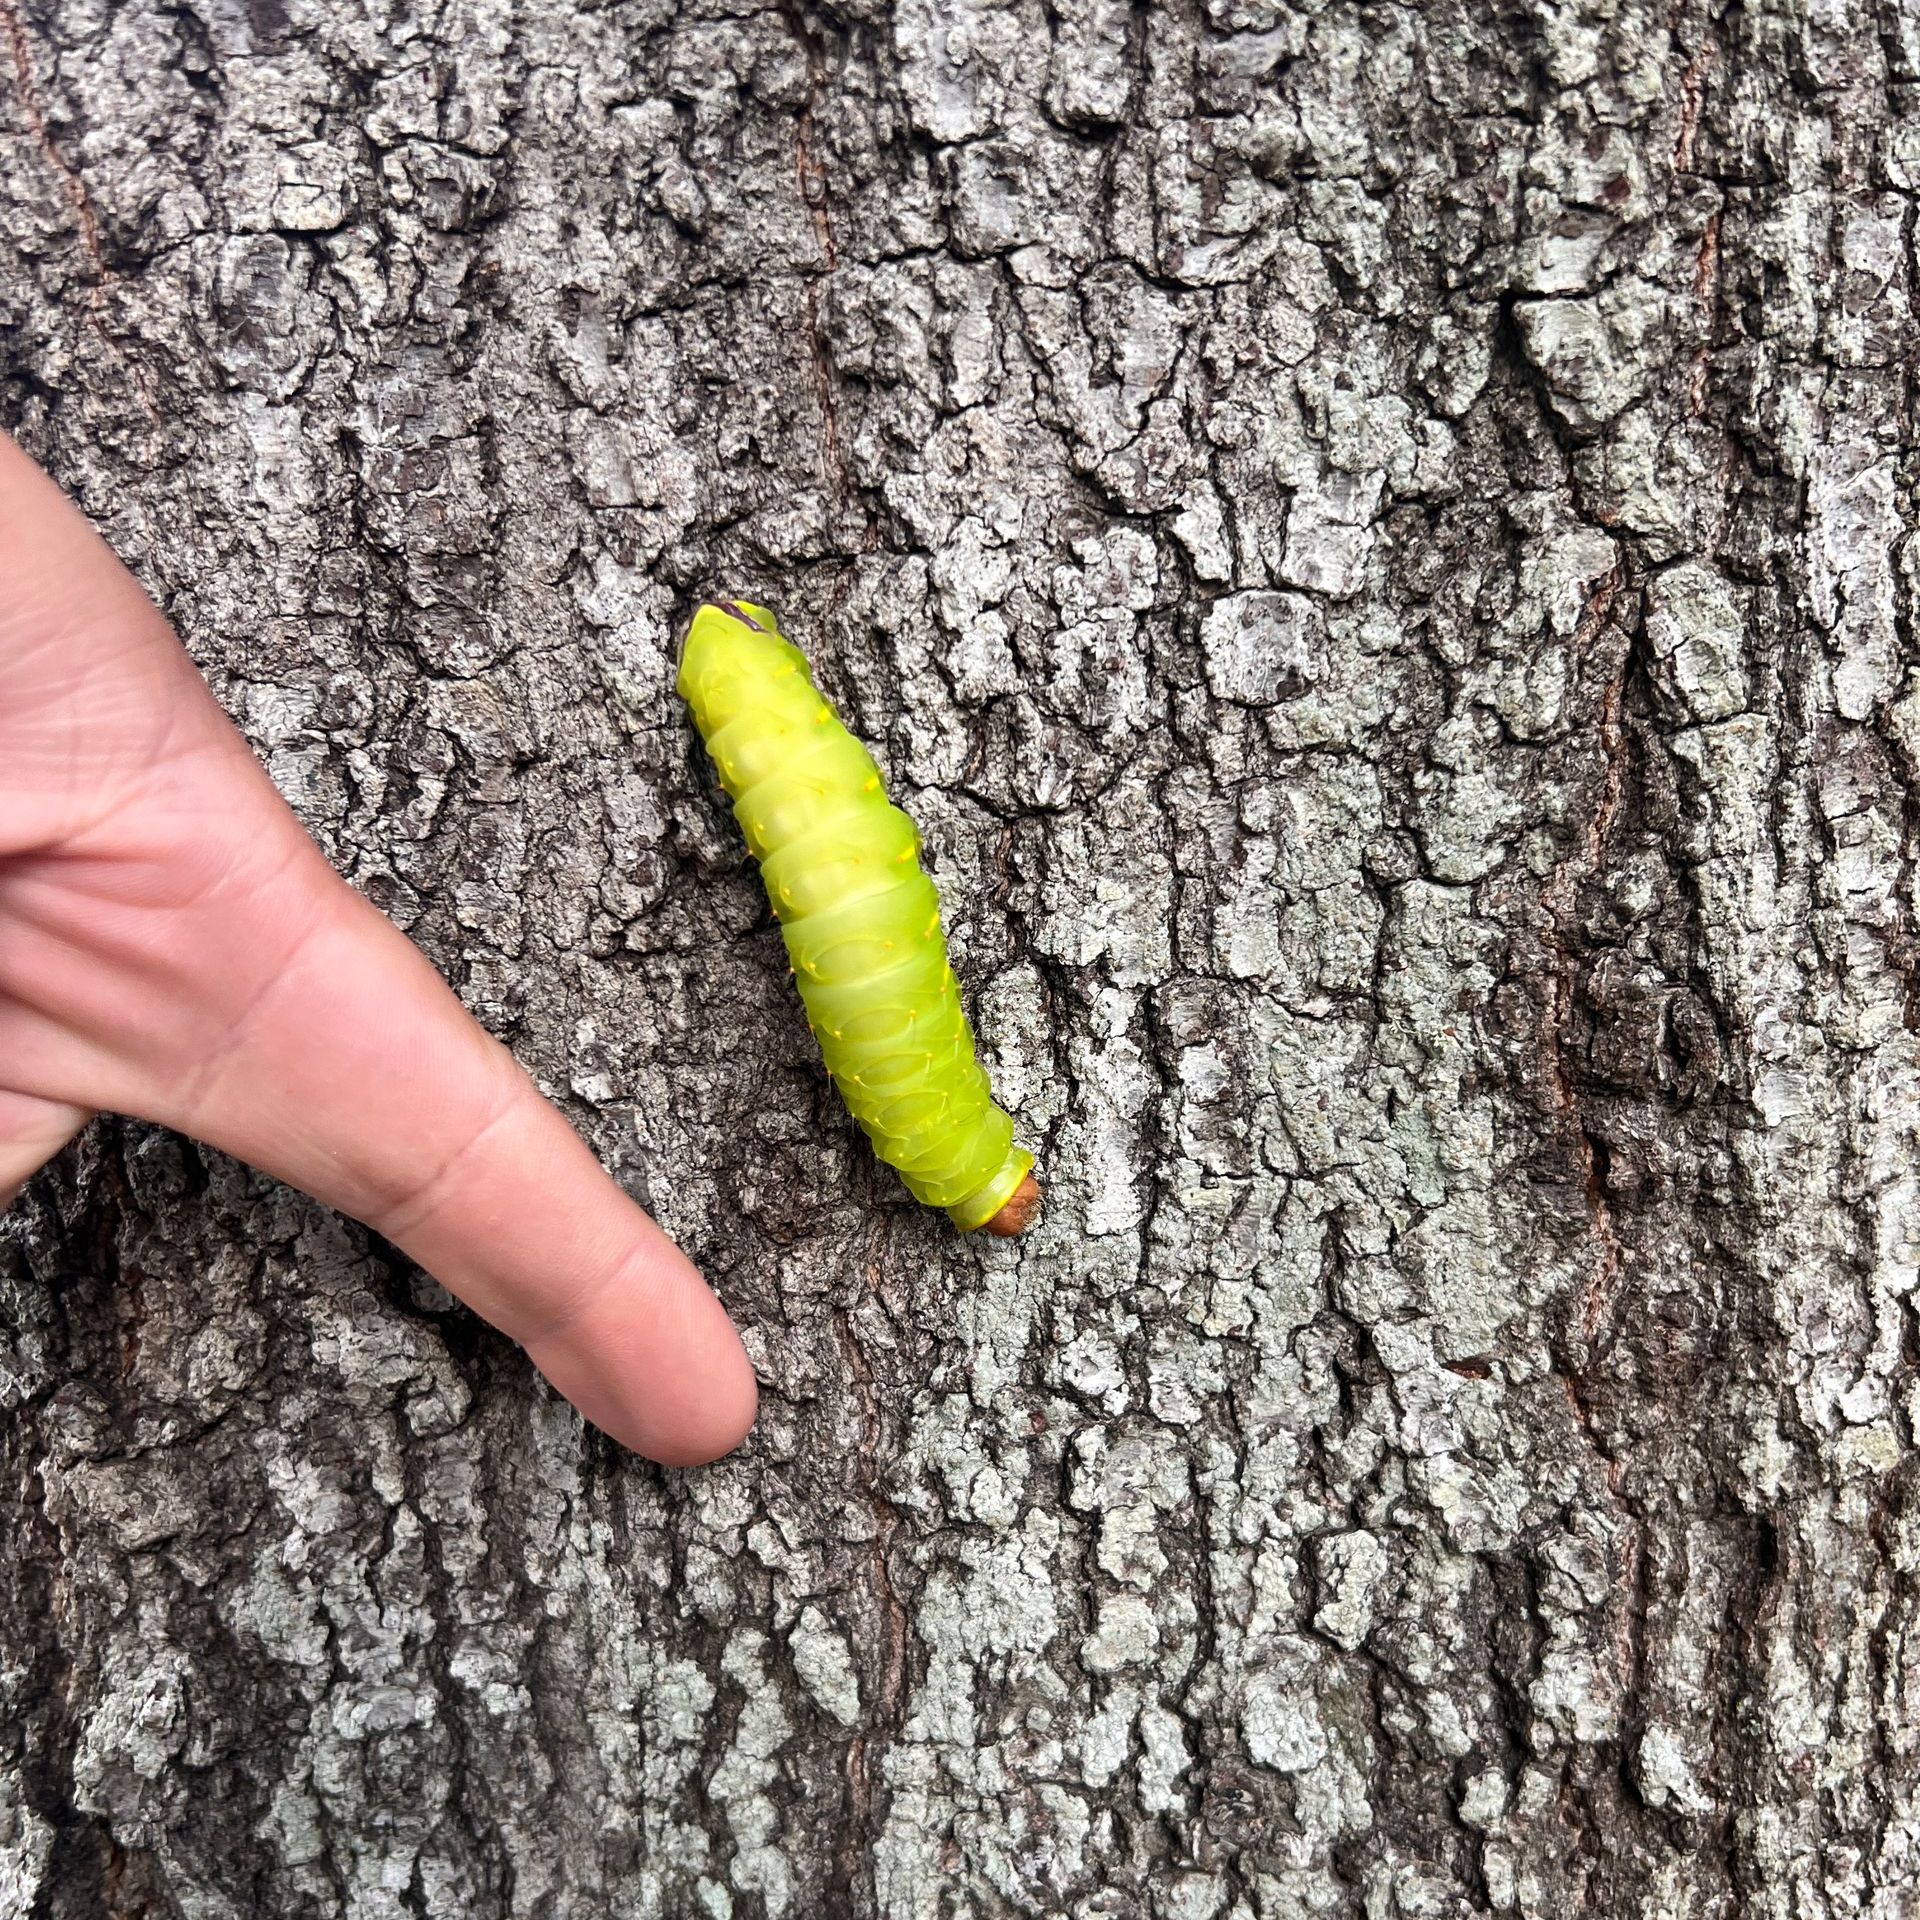 This picture shows a bright green caterpillar inching along a tree trunk.